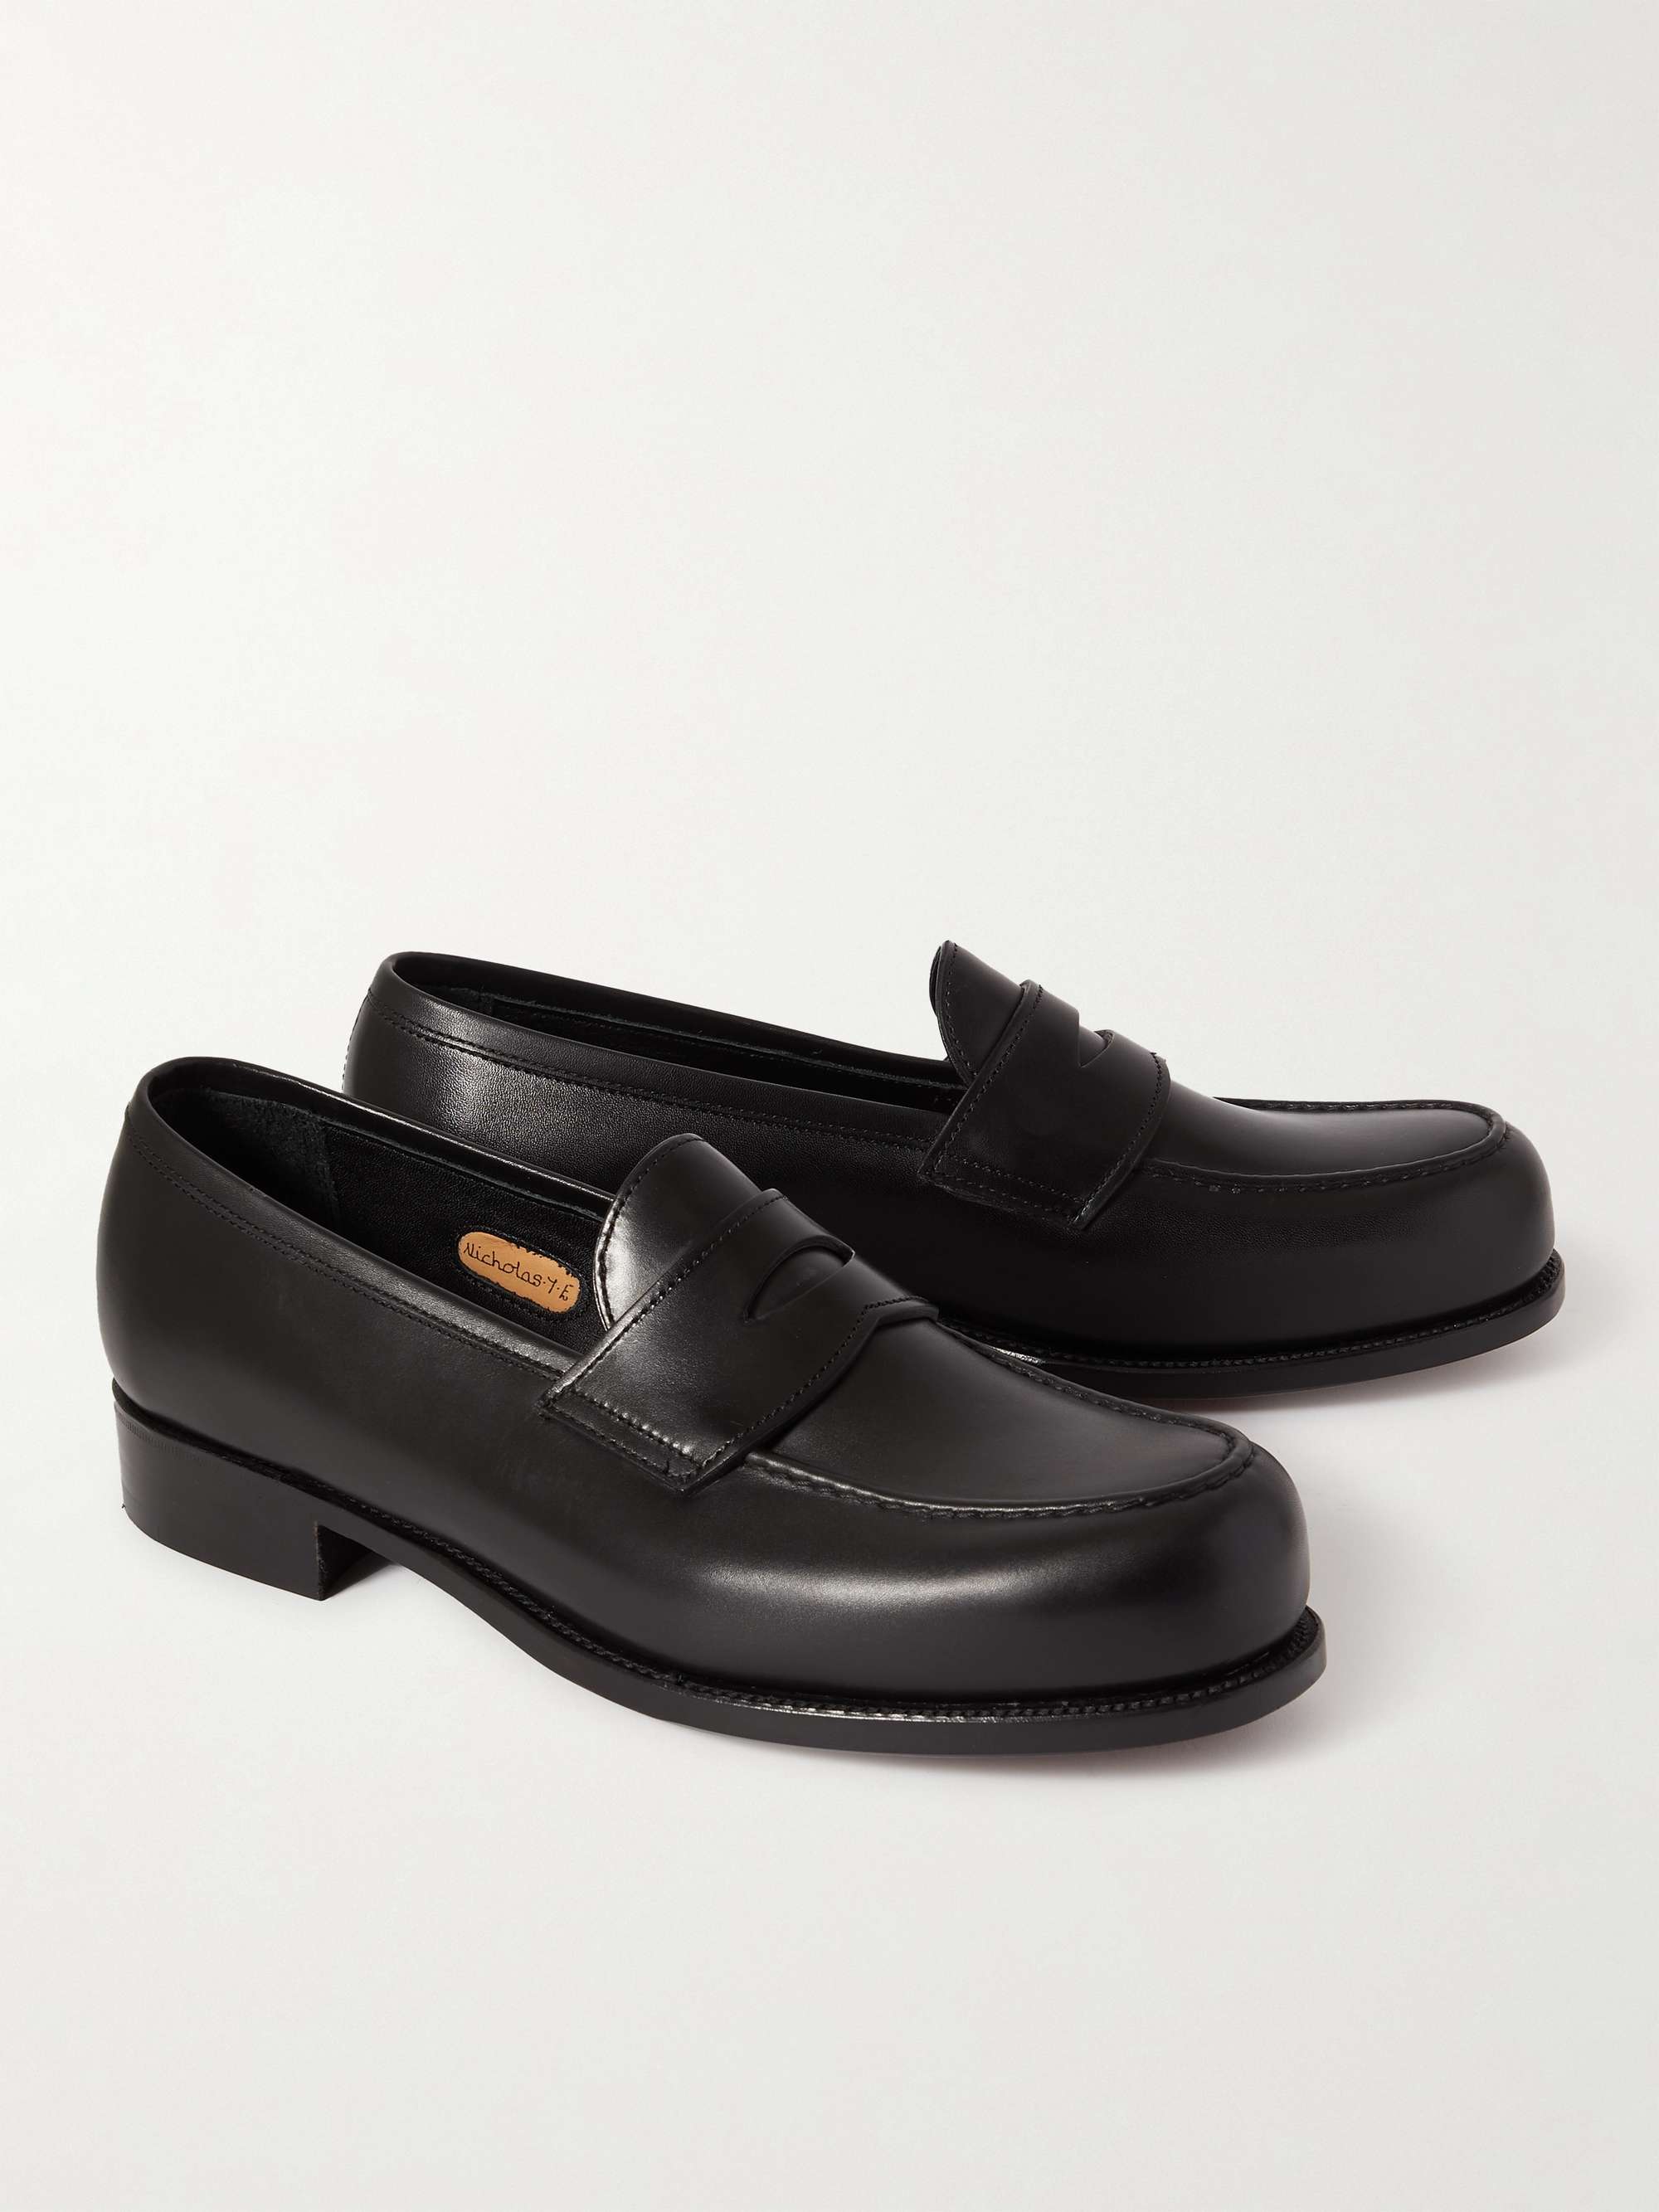 GEORGE CLEVERLEY Nicholas Leather Loafers